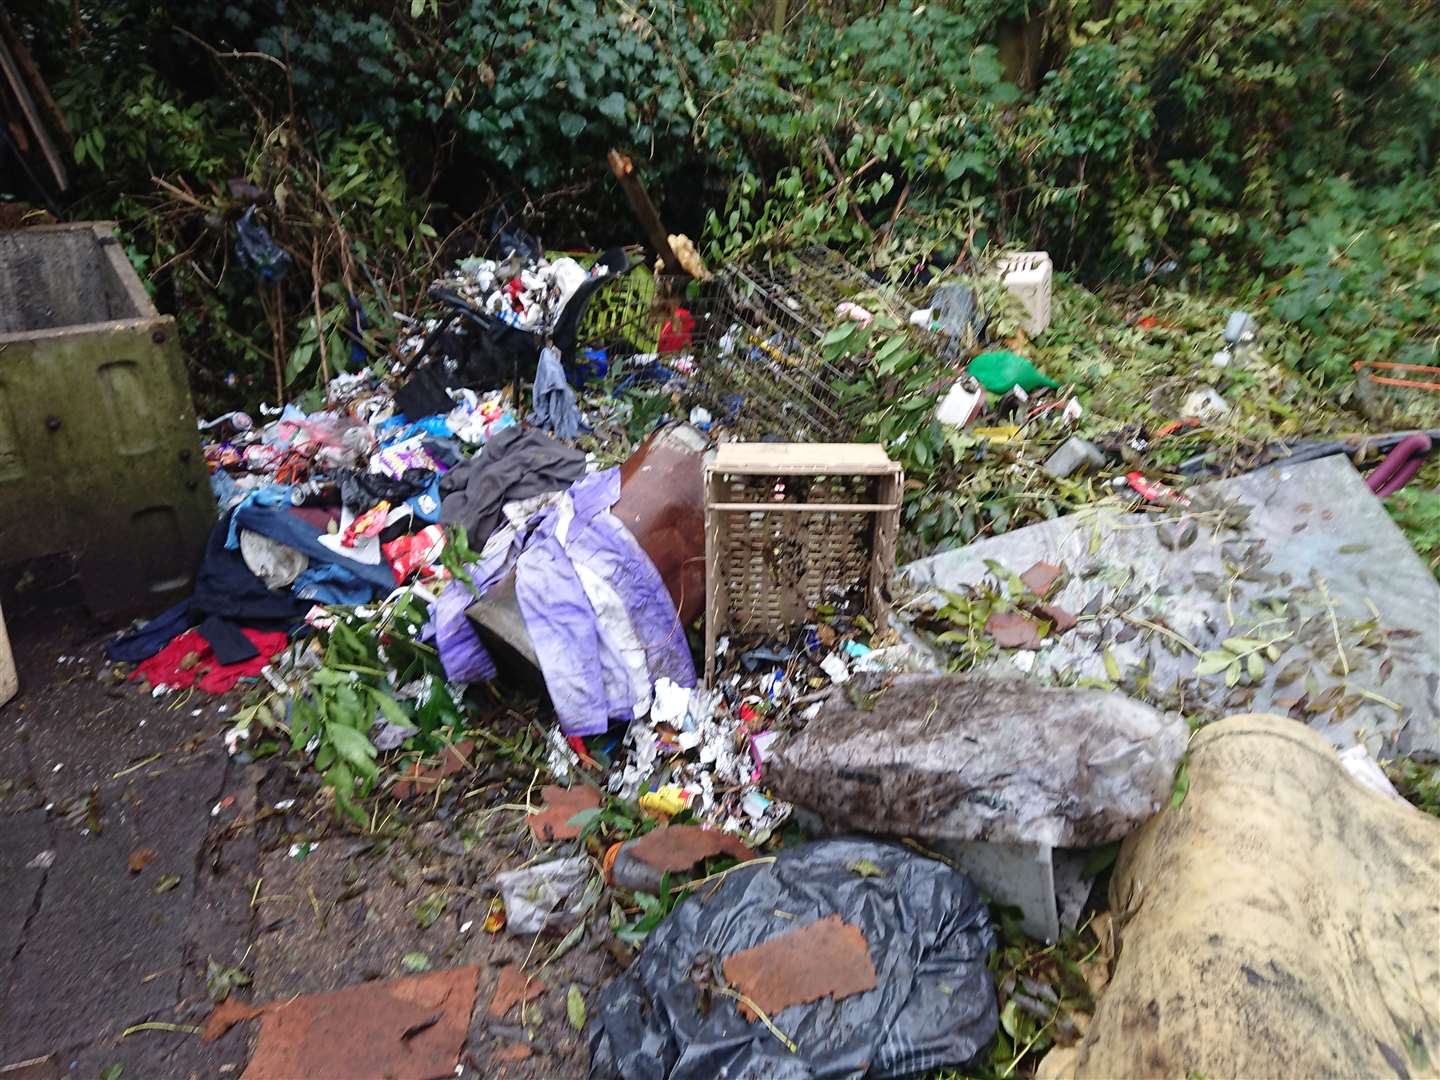 Rubbish has been strewn in the overgrown garden behind the abandoned property